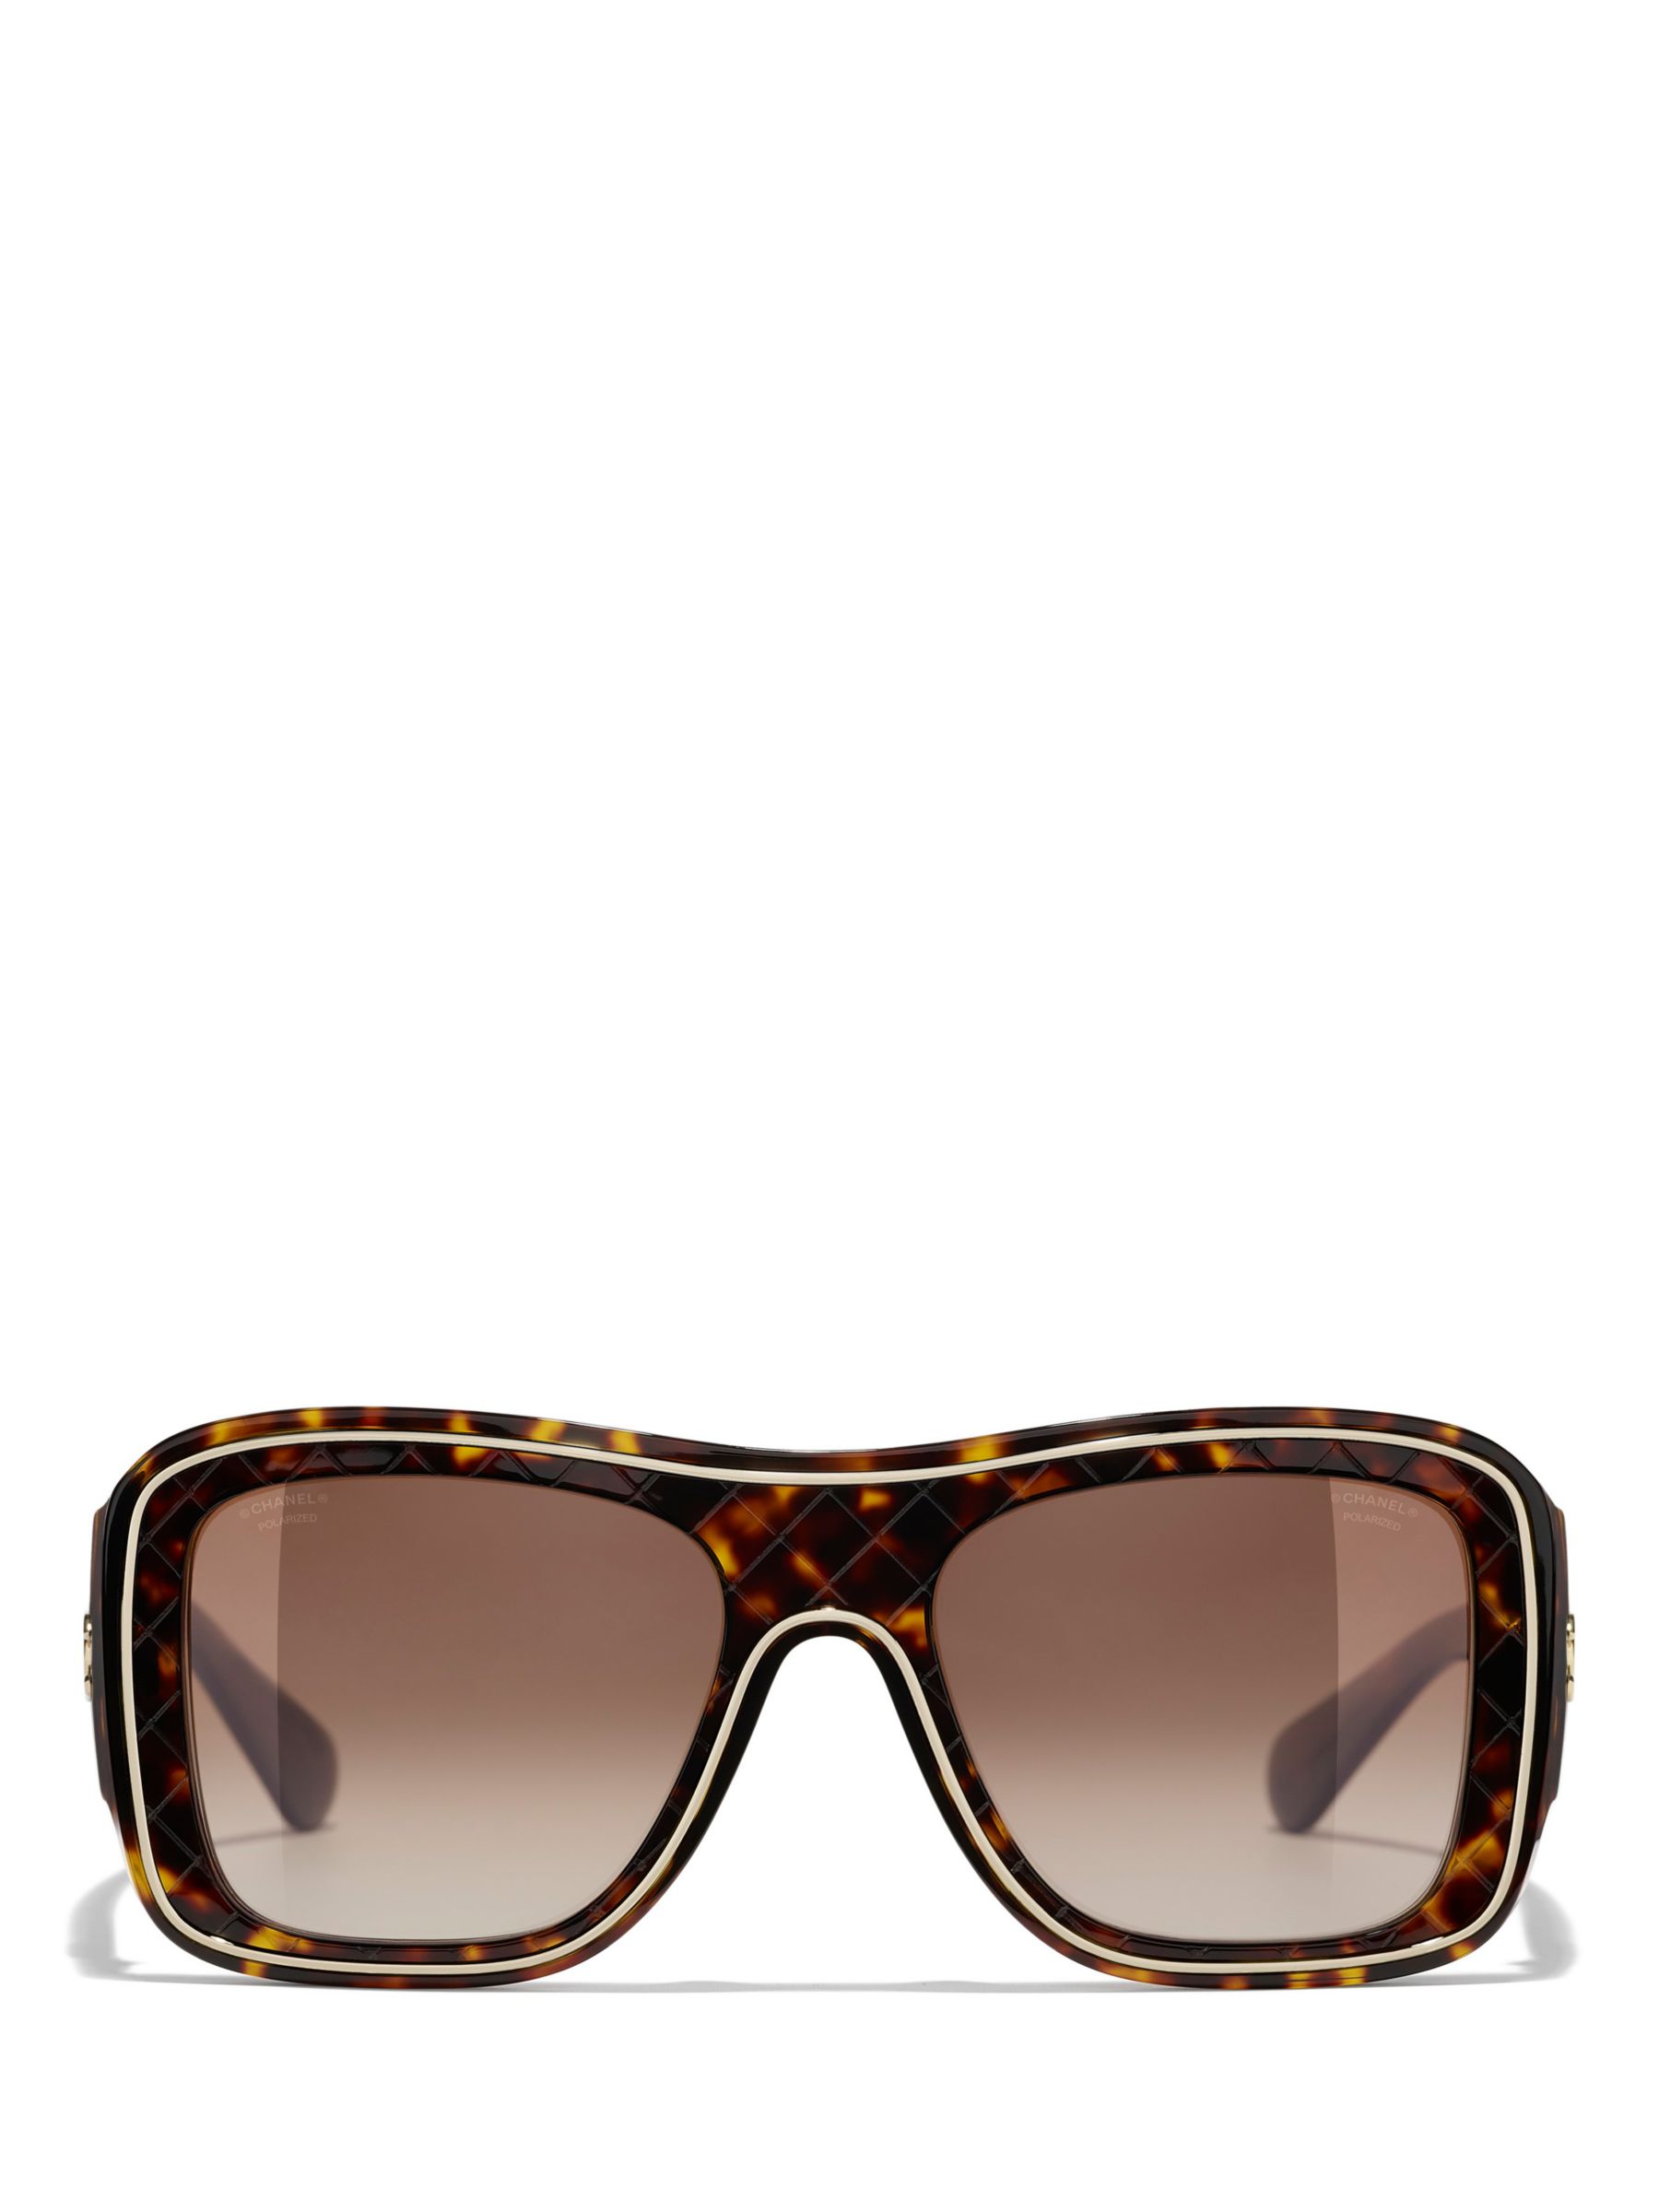 CHANEL Square Sunglasses CH5395 Tortoise/Brown Gradient at John Lewis ...